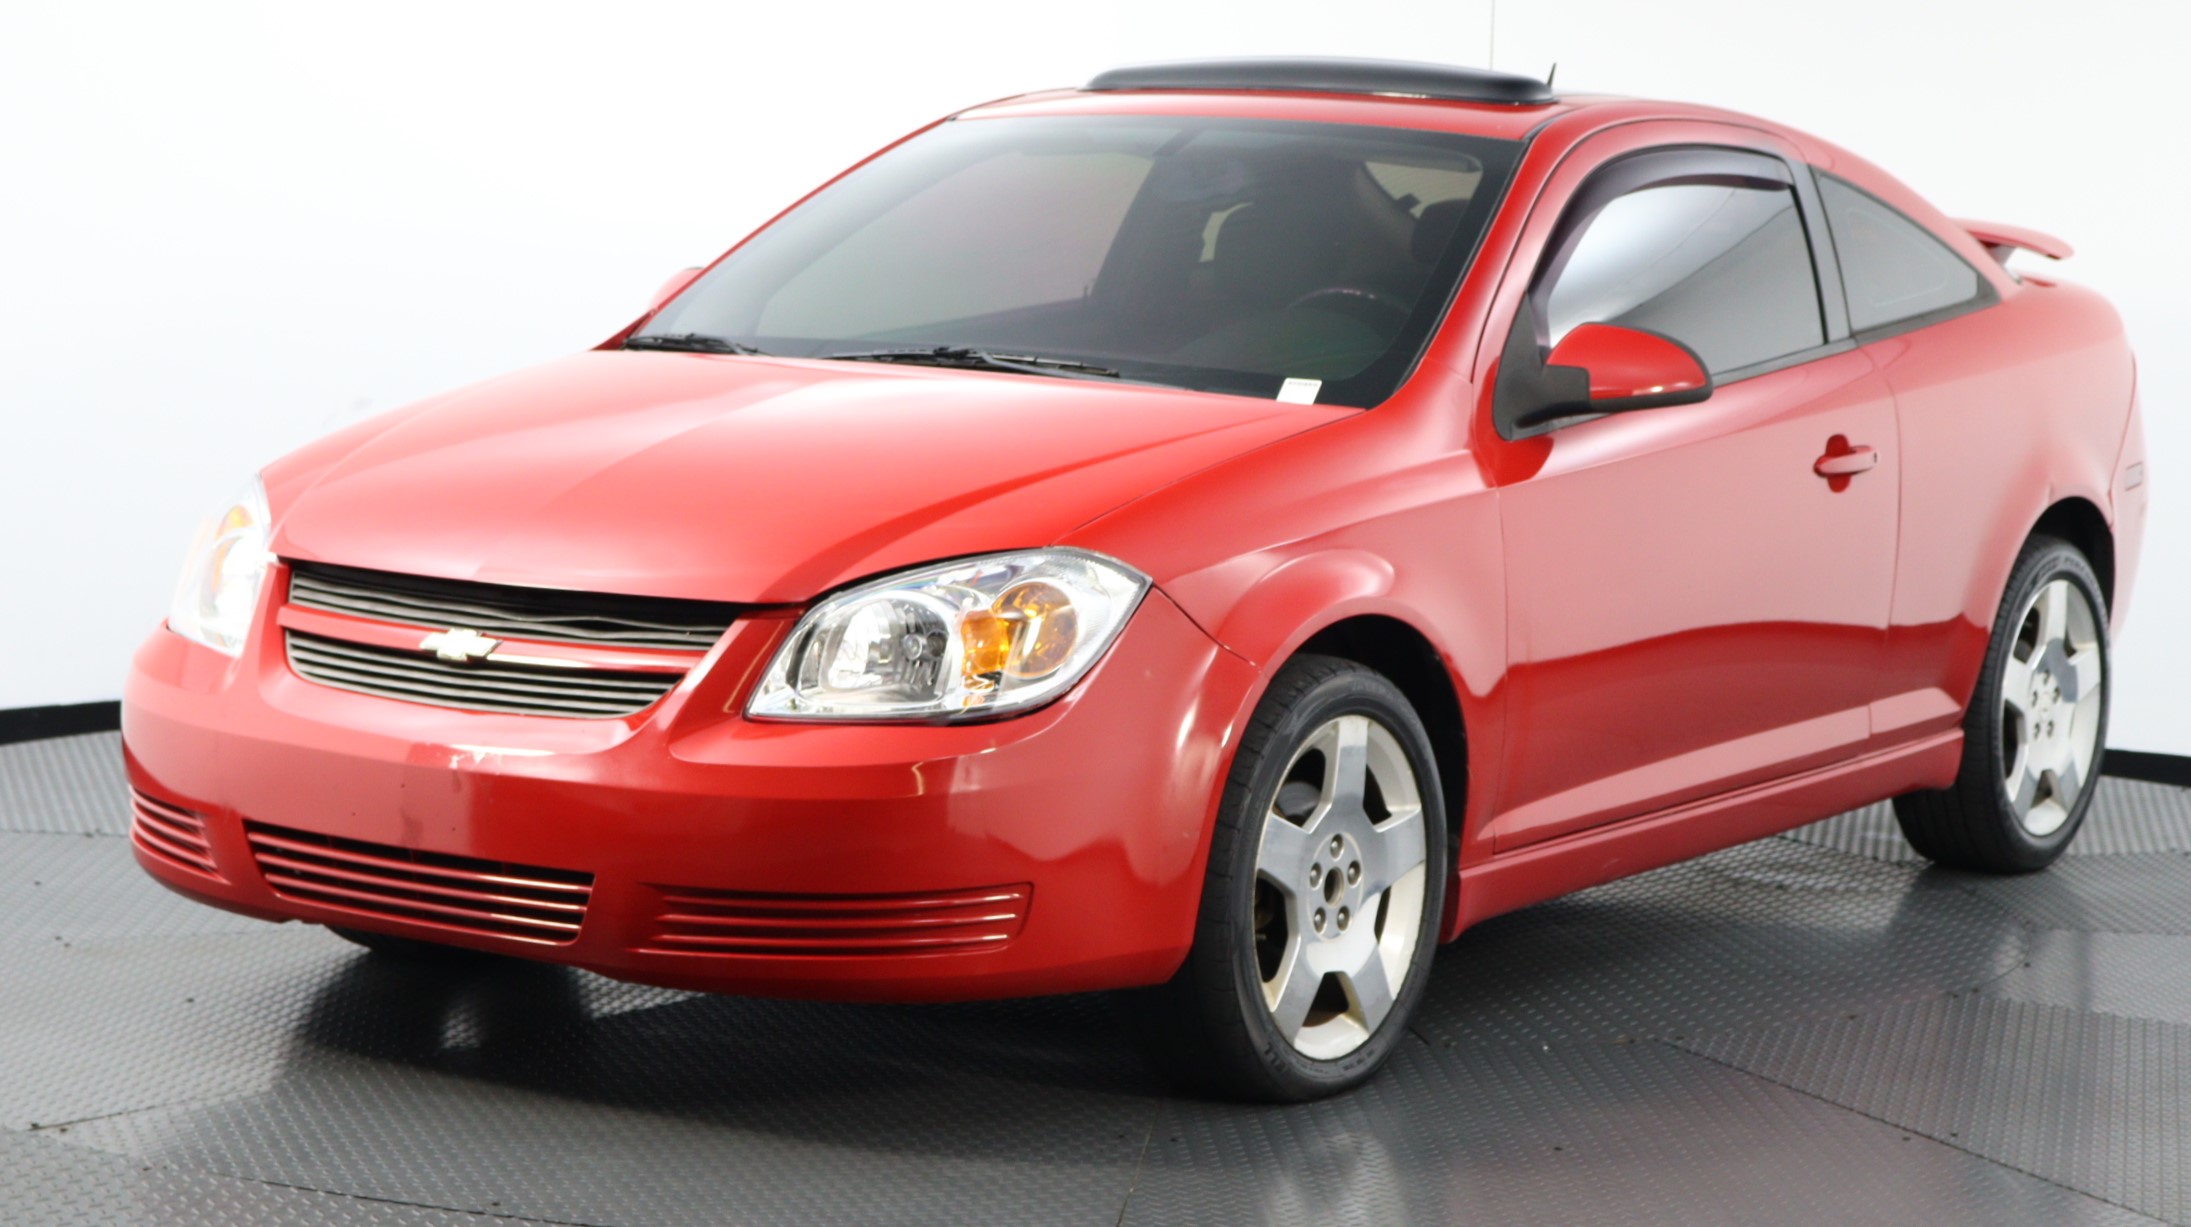 Used 2009 CHEVROLET COBALT LT W/2LT for sale in WEST PALM | 125182